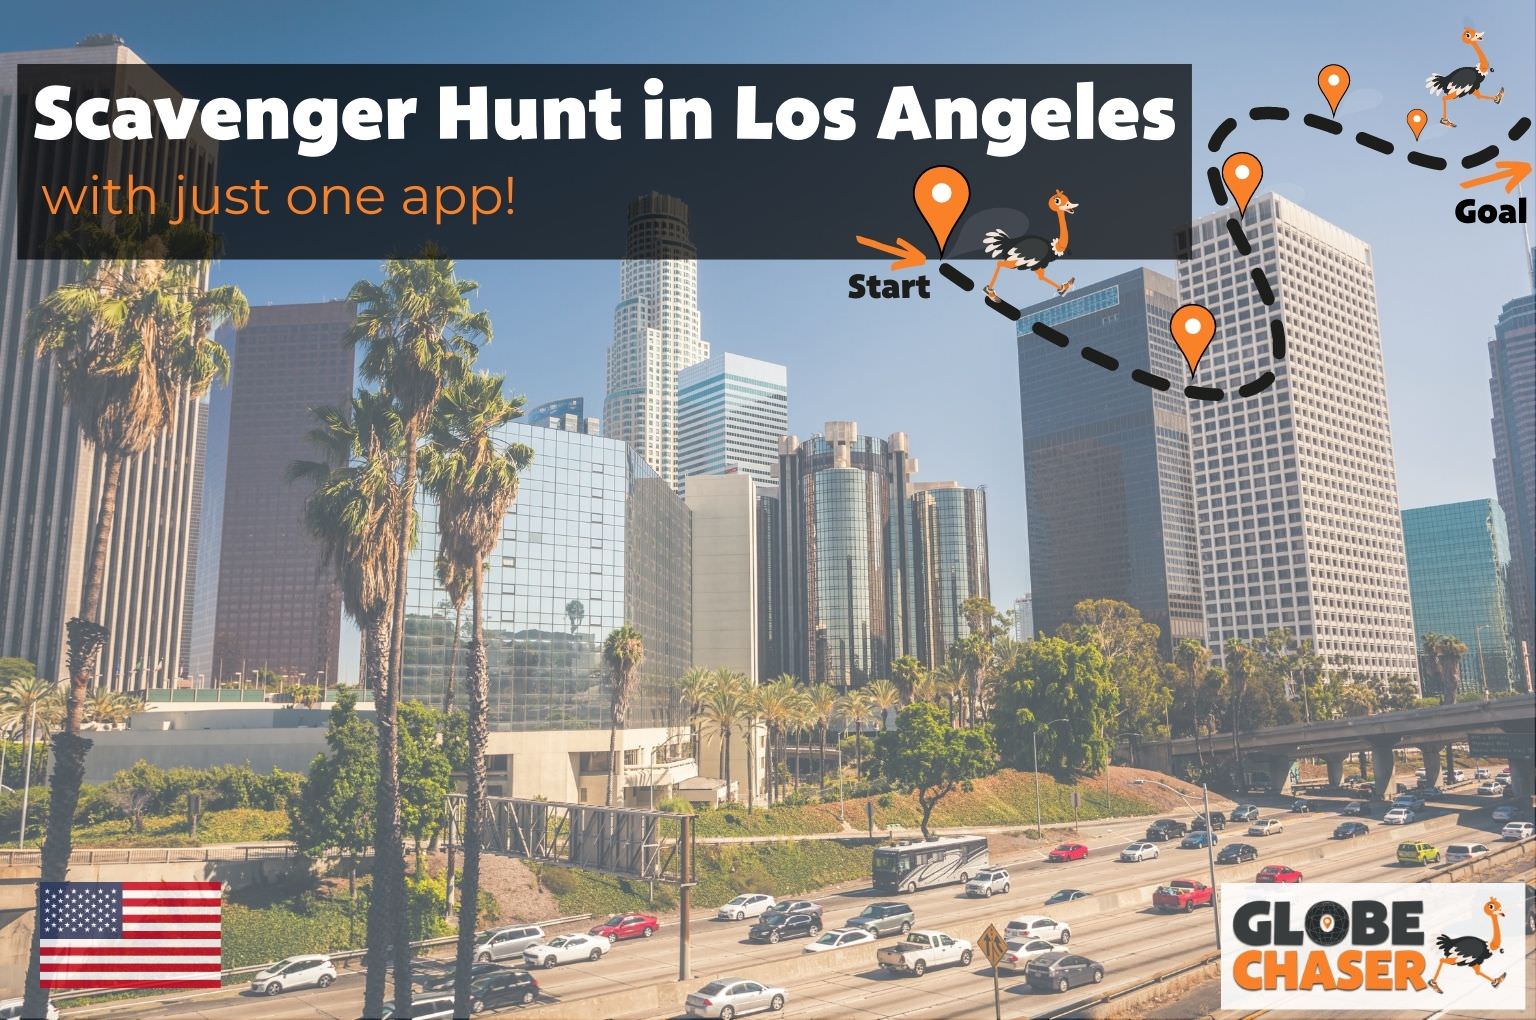 Scavenger Hunt in Los Angeles, USA - Family Activities with the Globe Chaser App for Outdoor Fun